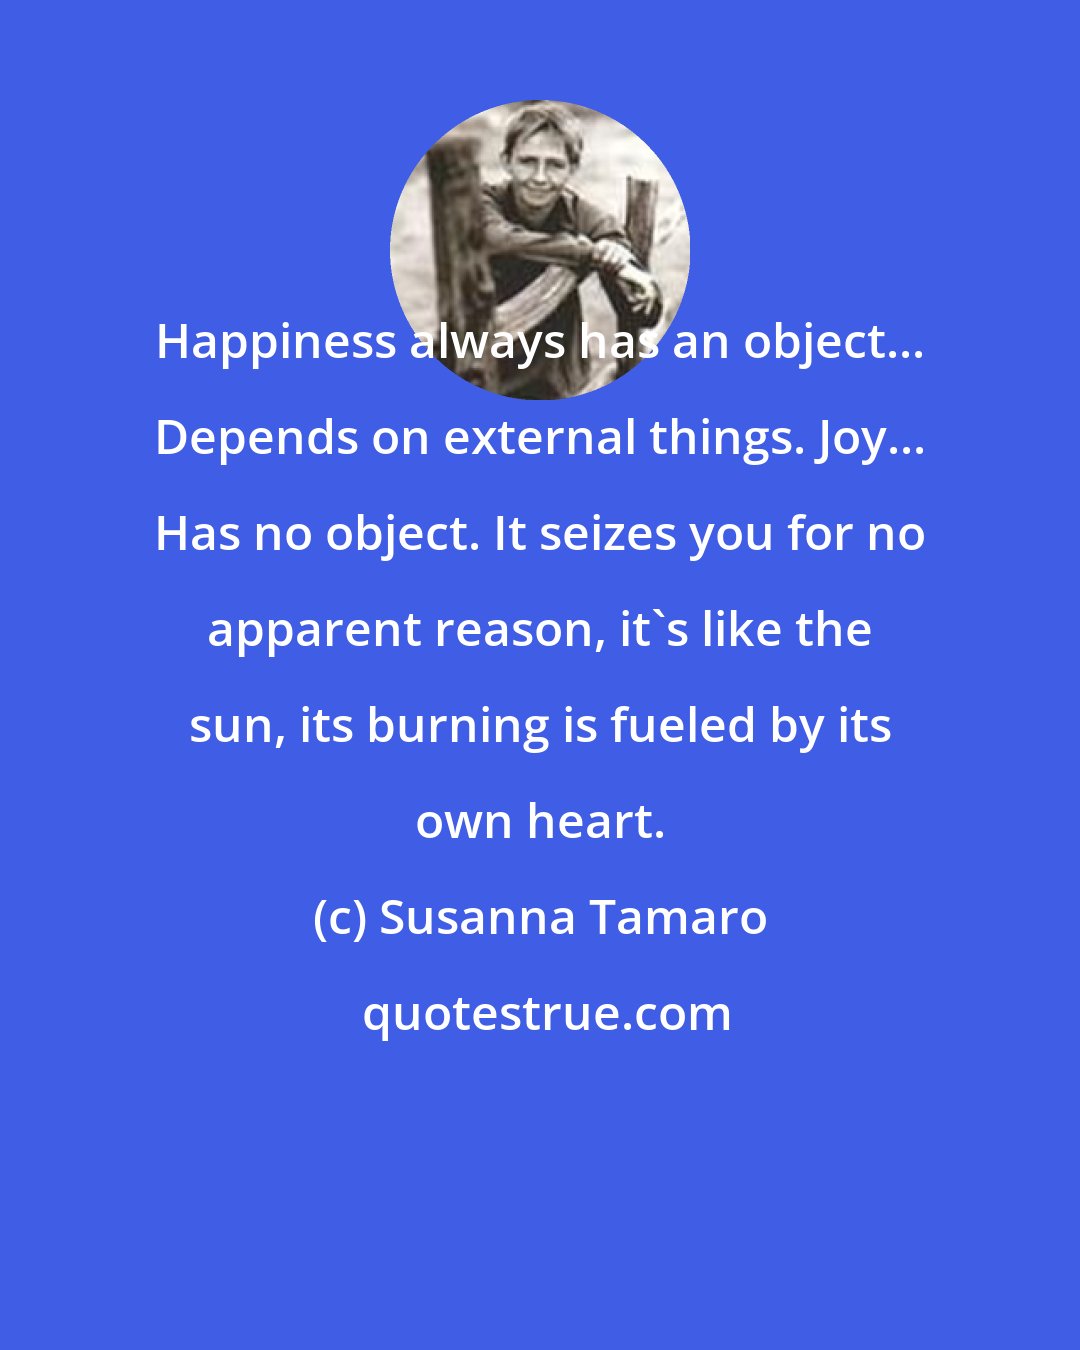 Susanna Tamaro: Happiness always has an object... Depends on external things. Joy... Has no object. It seizes you for no apparent reason, it's like the sun, its burning is fueled by its own heart.